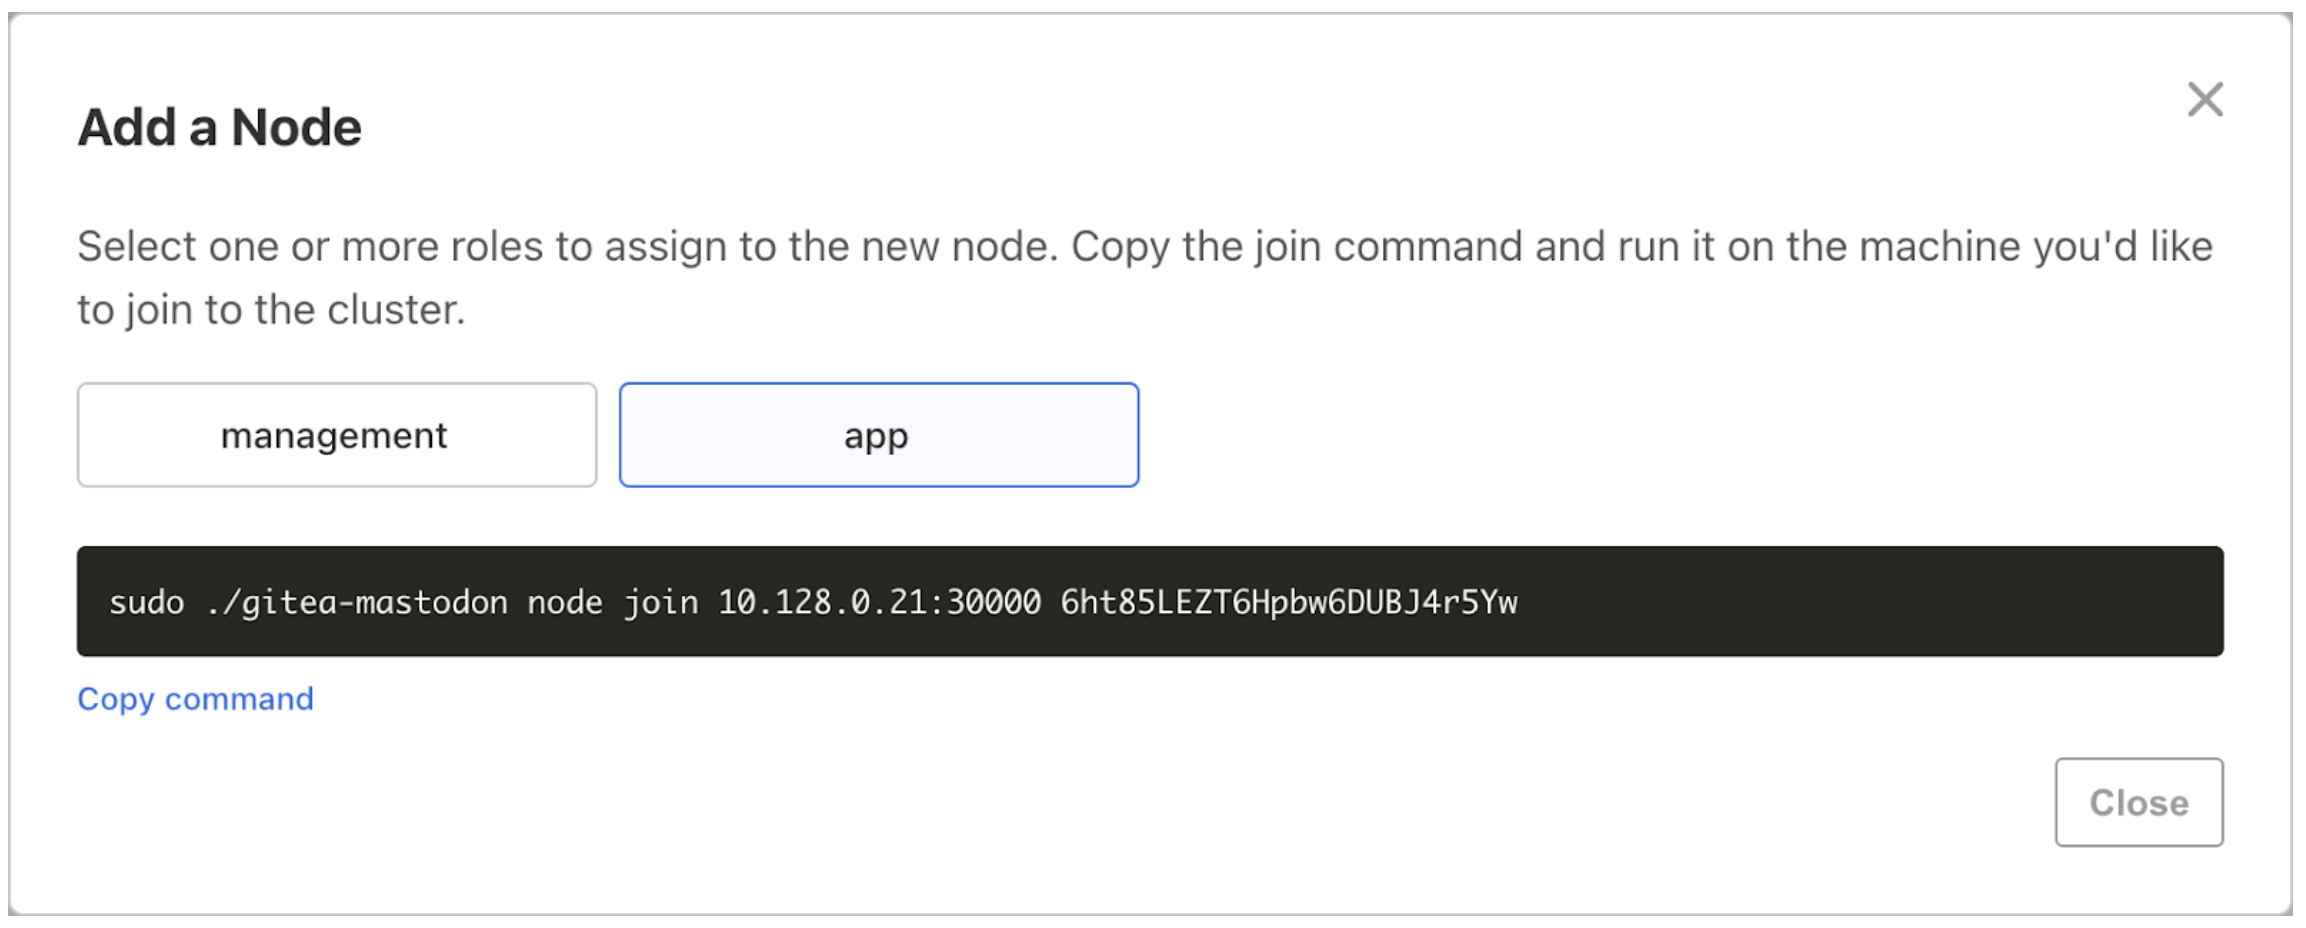 Add node page in the admin console